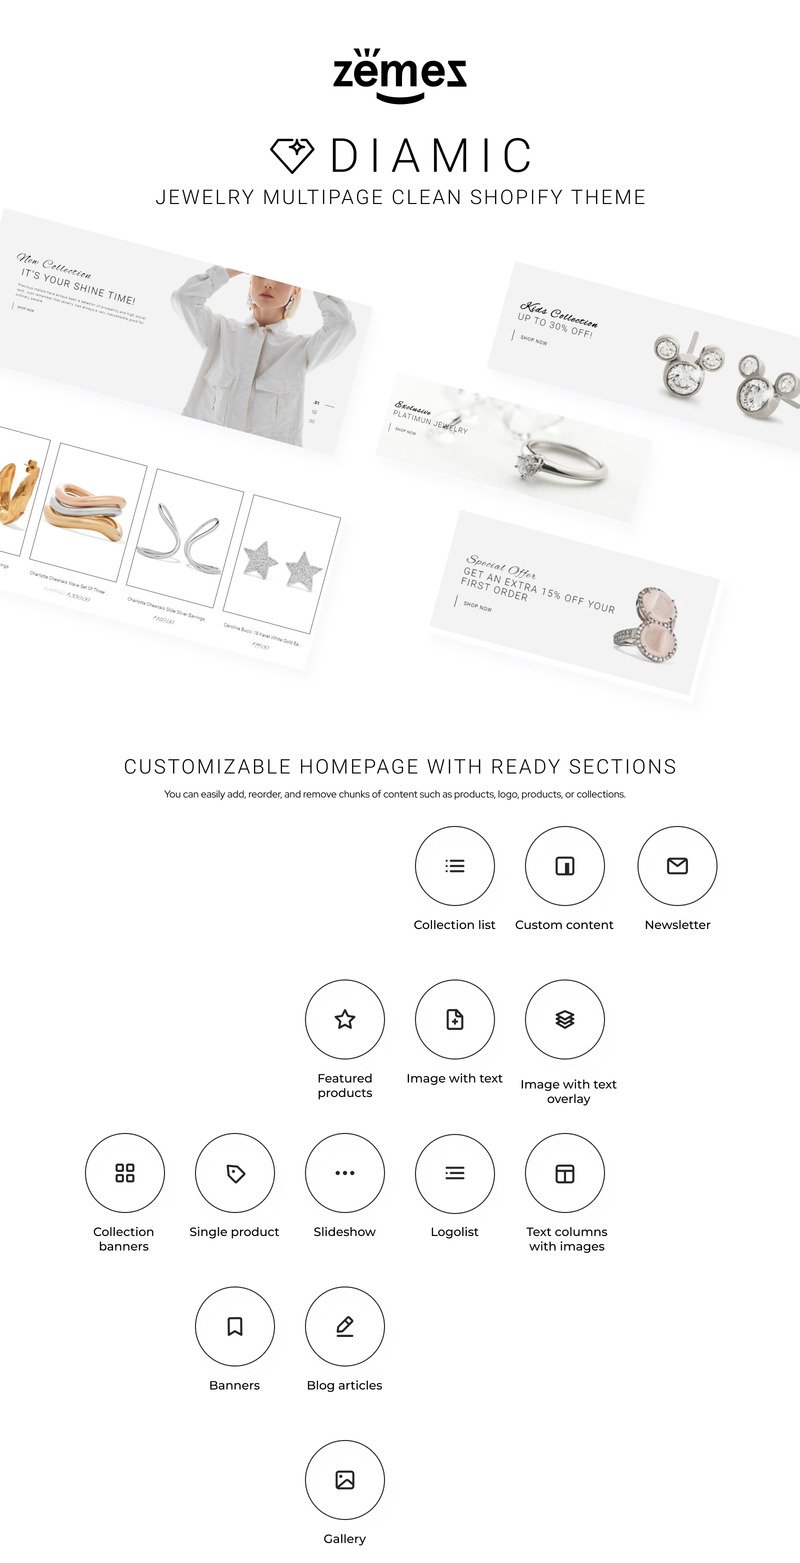 Diamic - Jewelry Multipage Clean Shopify Theme - Features Image 1